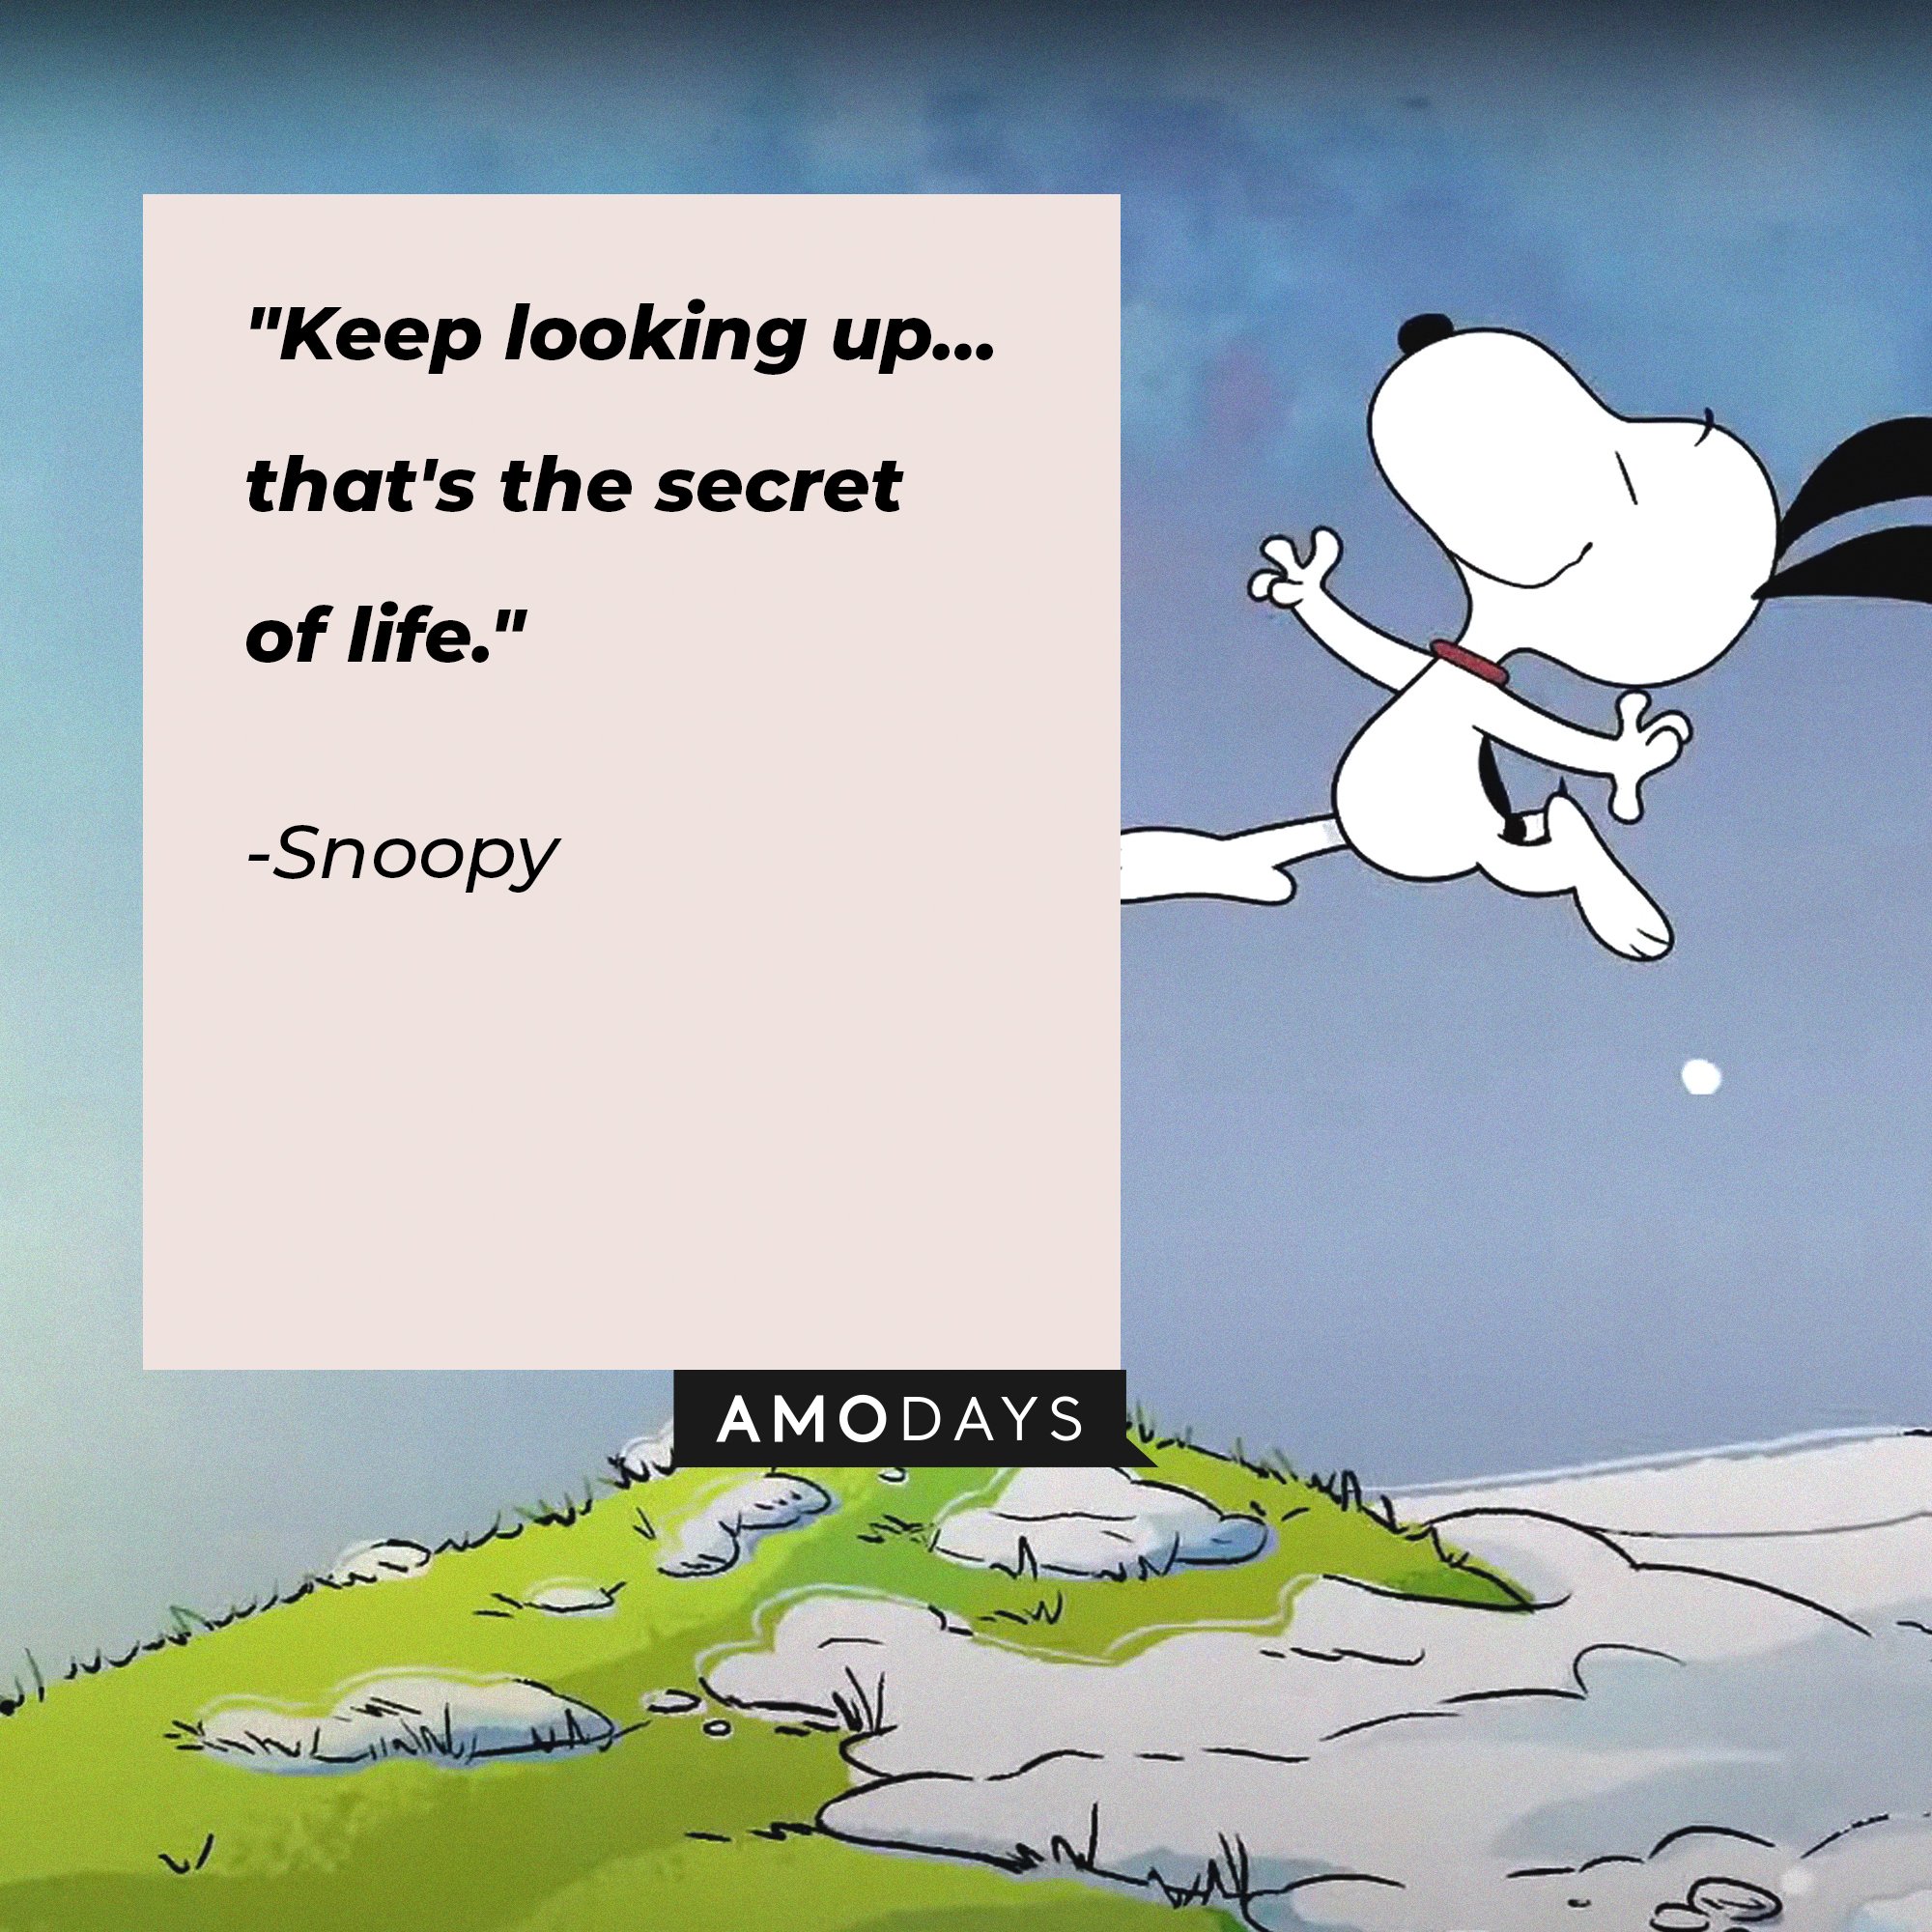 Snoopy’s quote: "Keep looking up… that's the secret of life." | Image: AmoDays